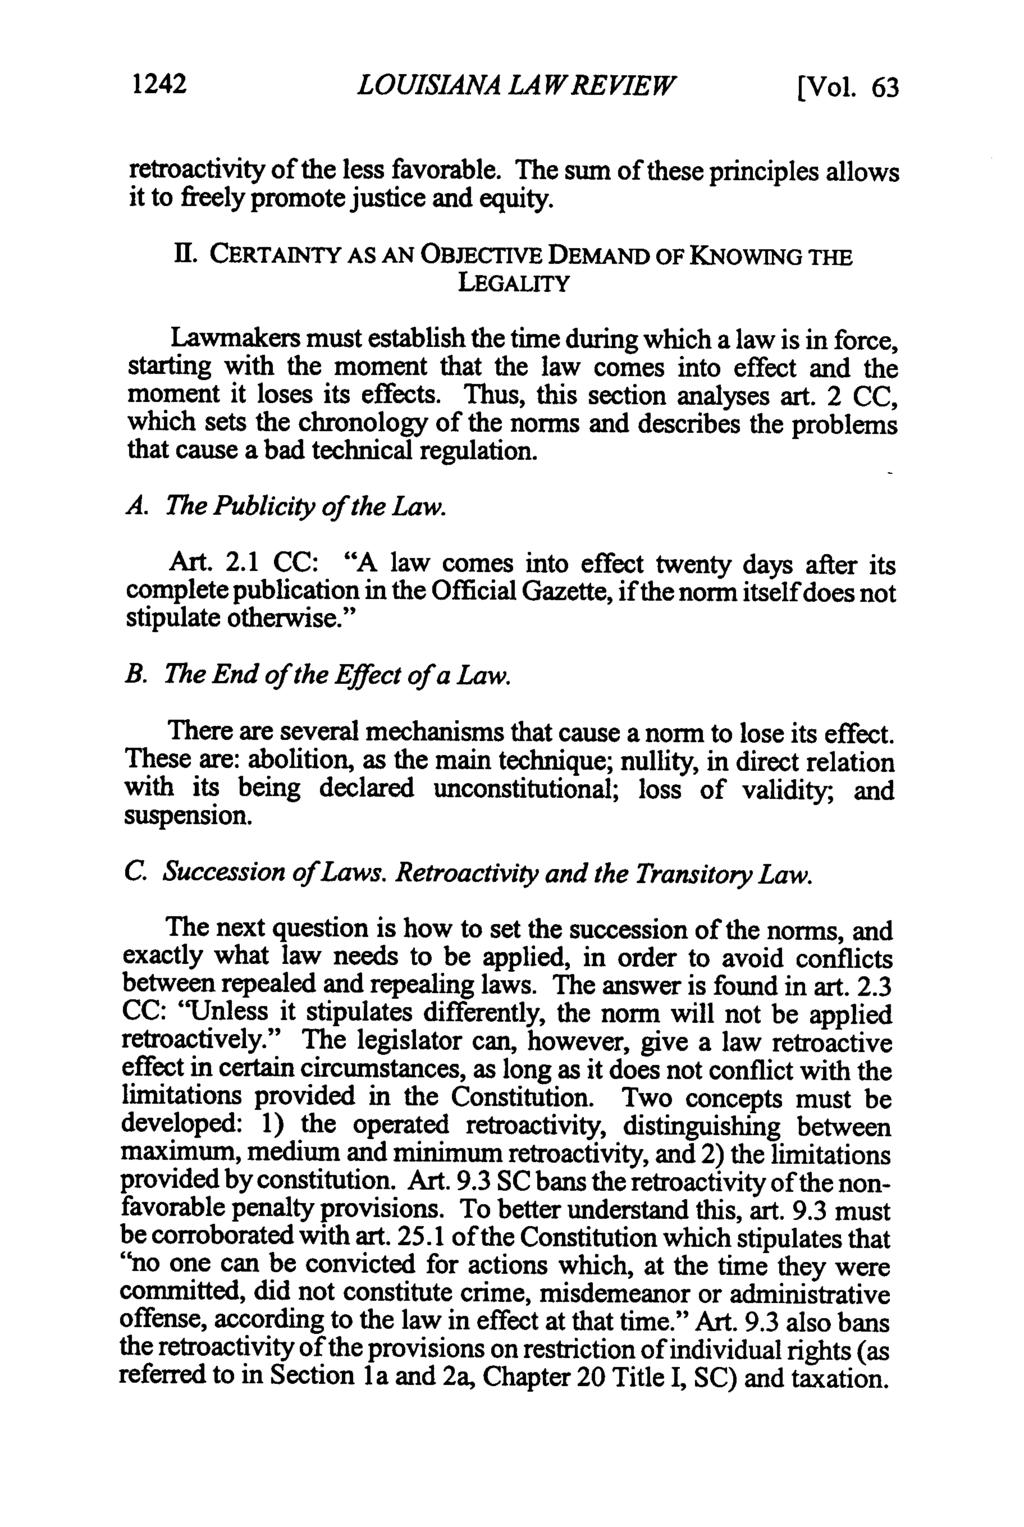 1242 2LOUISIANA LA W REVIEW [Vol. 63 retroactivity of the less favorable. The sum of these principles allows it to freely promote justice and equity. HI.